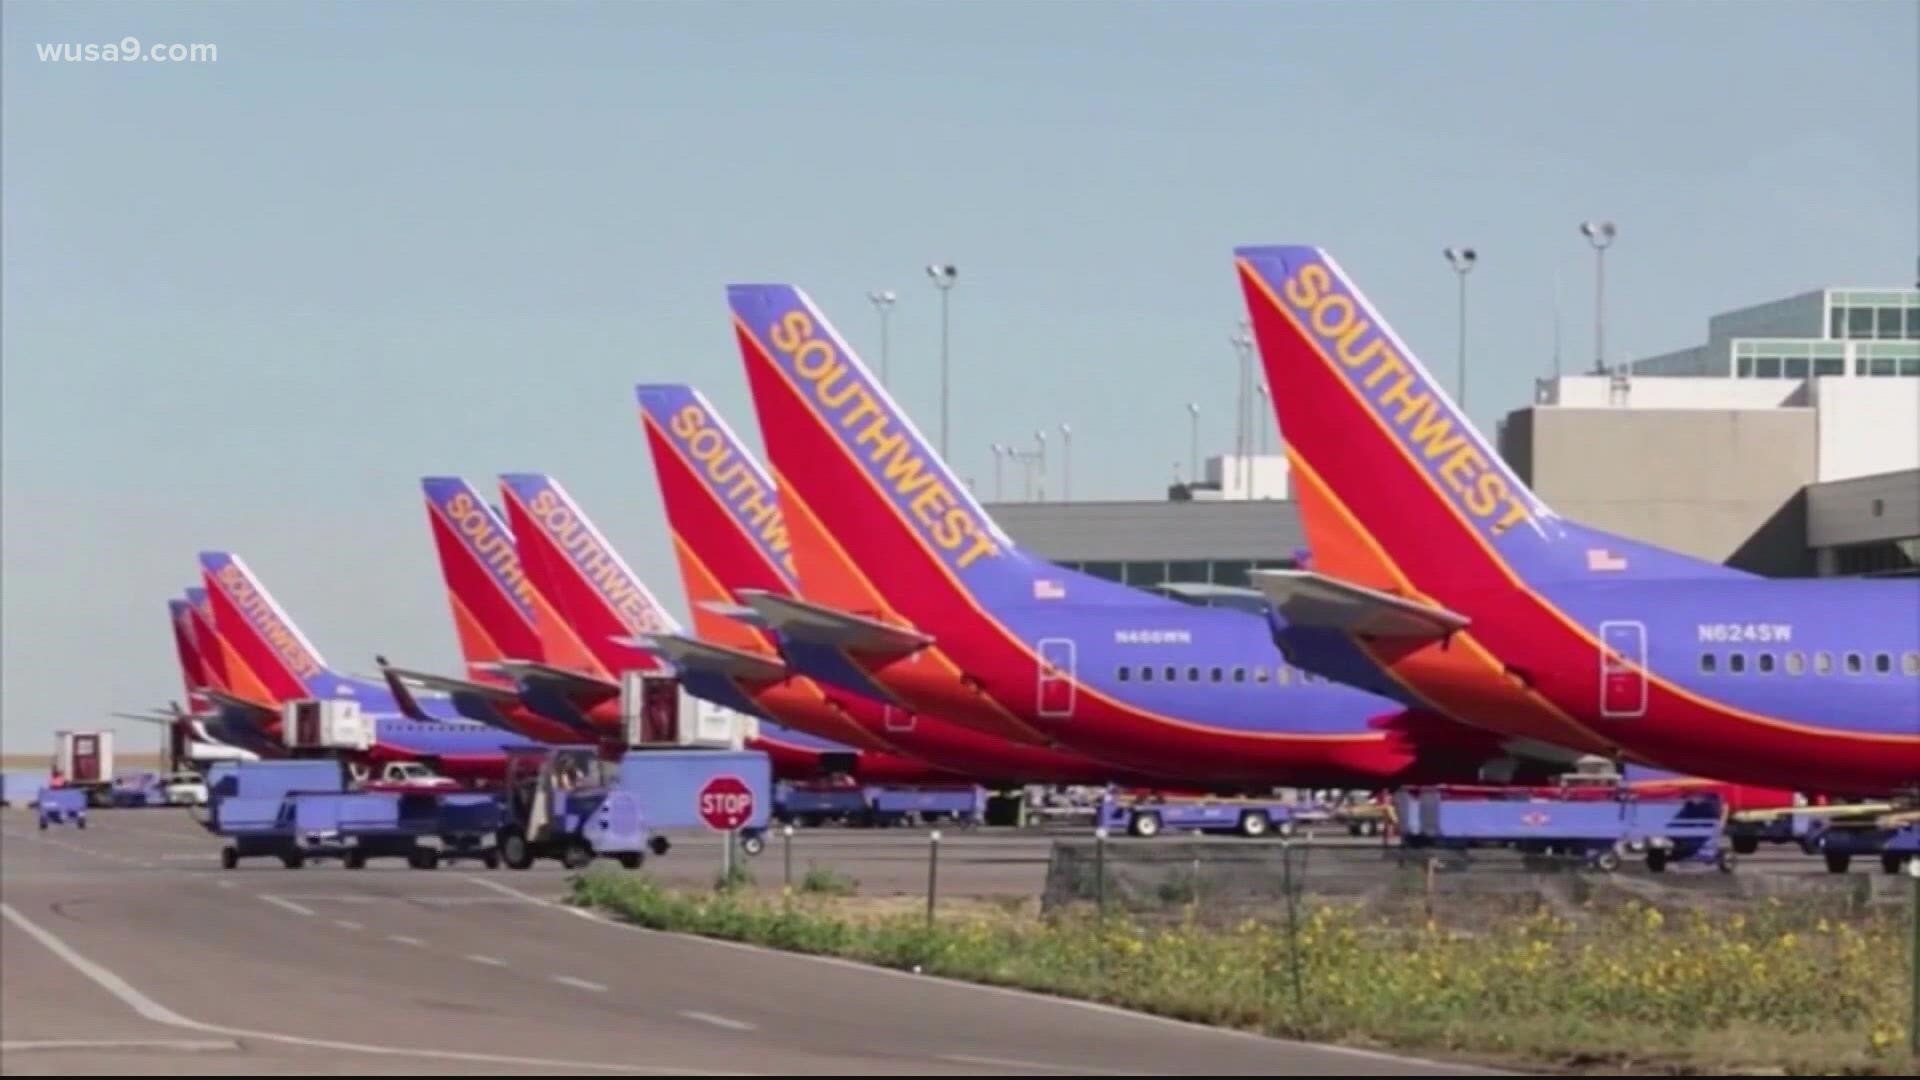 Long lines could be seen around the country as flight after flight was canceled on southwest airlines.